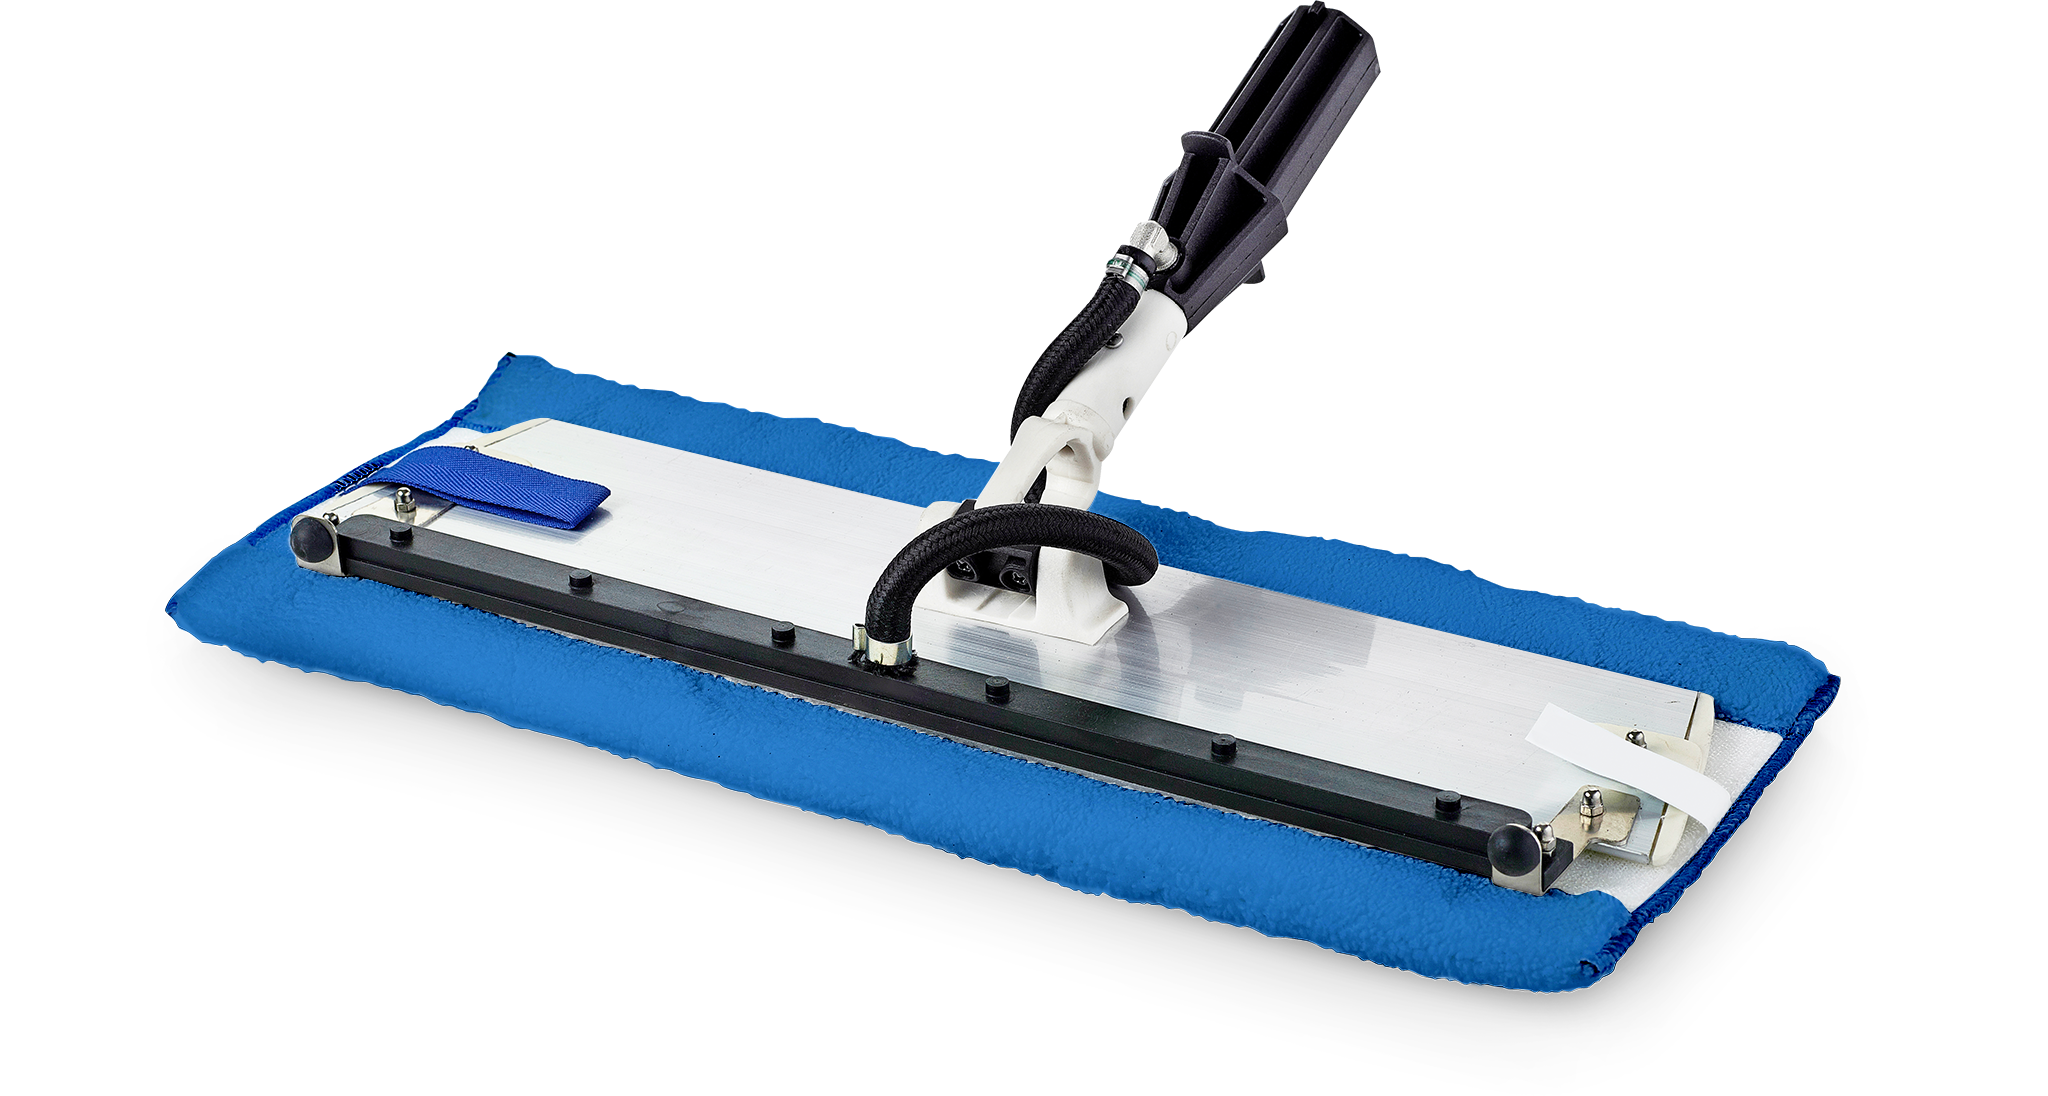 The Dupray SteamMop™ is perfect to clean floors, walls, and ceilings. 